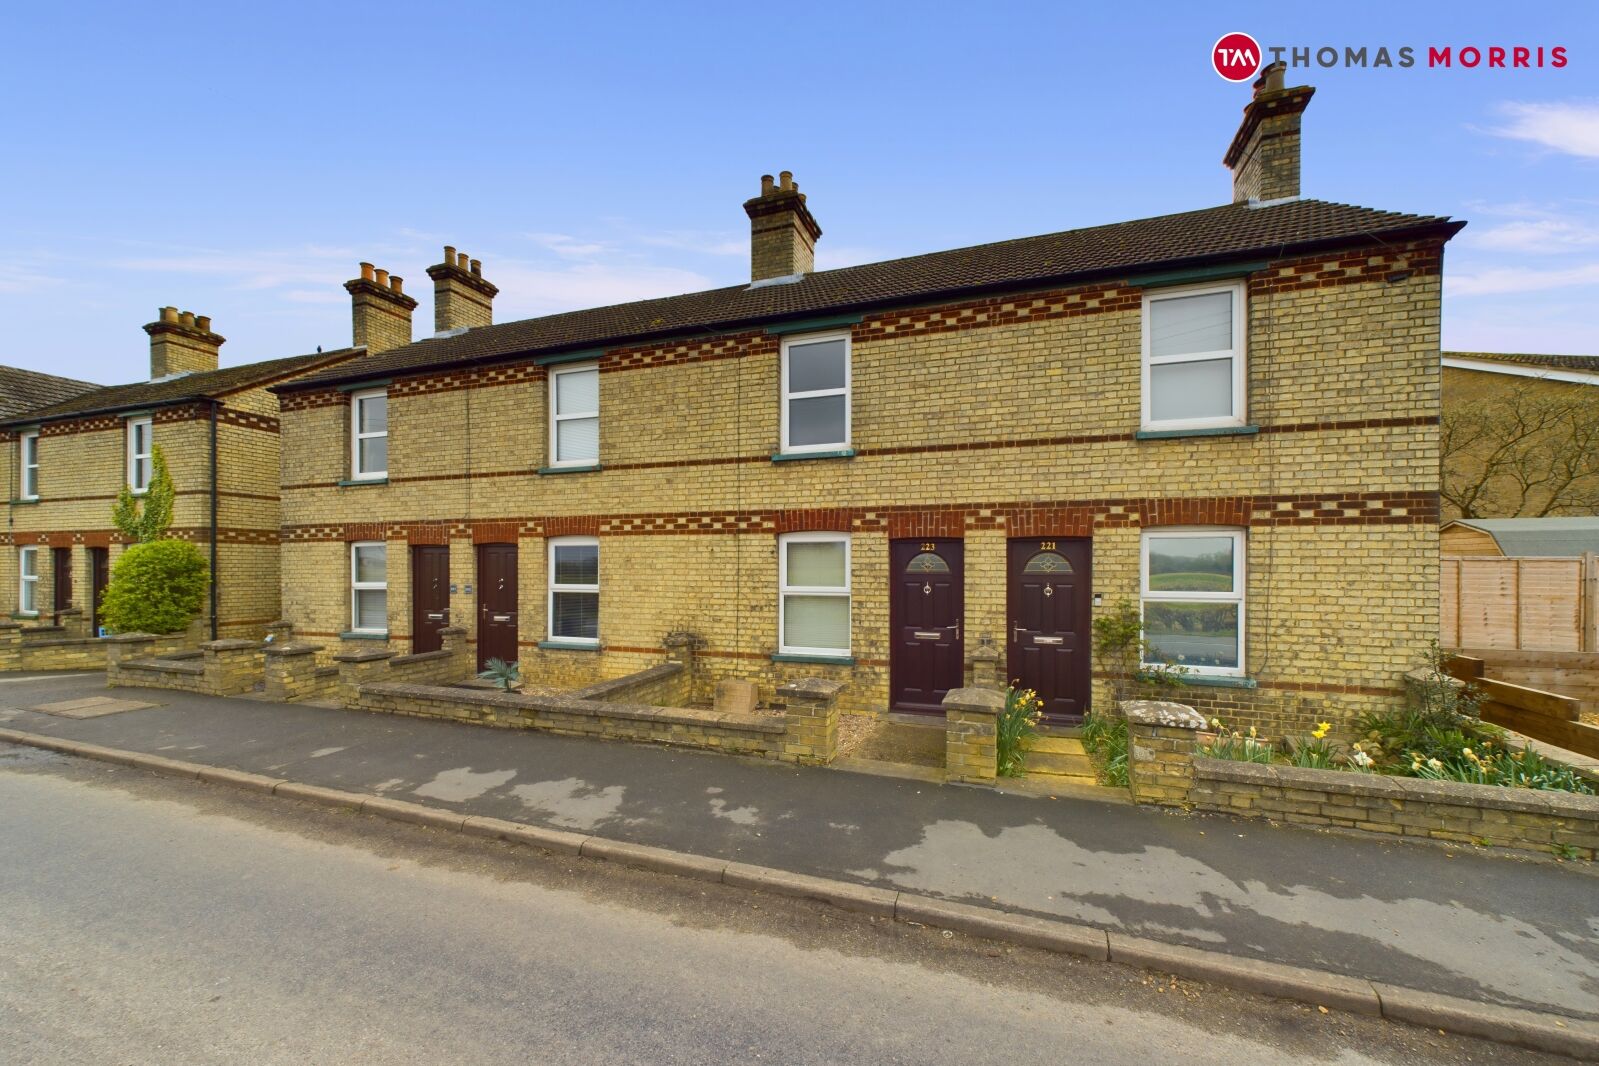 3 bedroom mid terraced house to rent, Available now High Street, Offord Cluny, PE19, main image